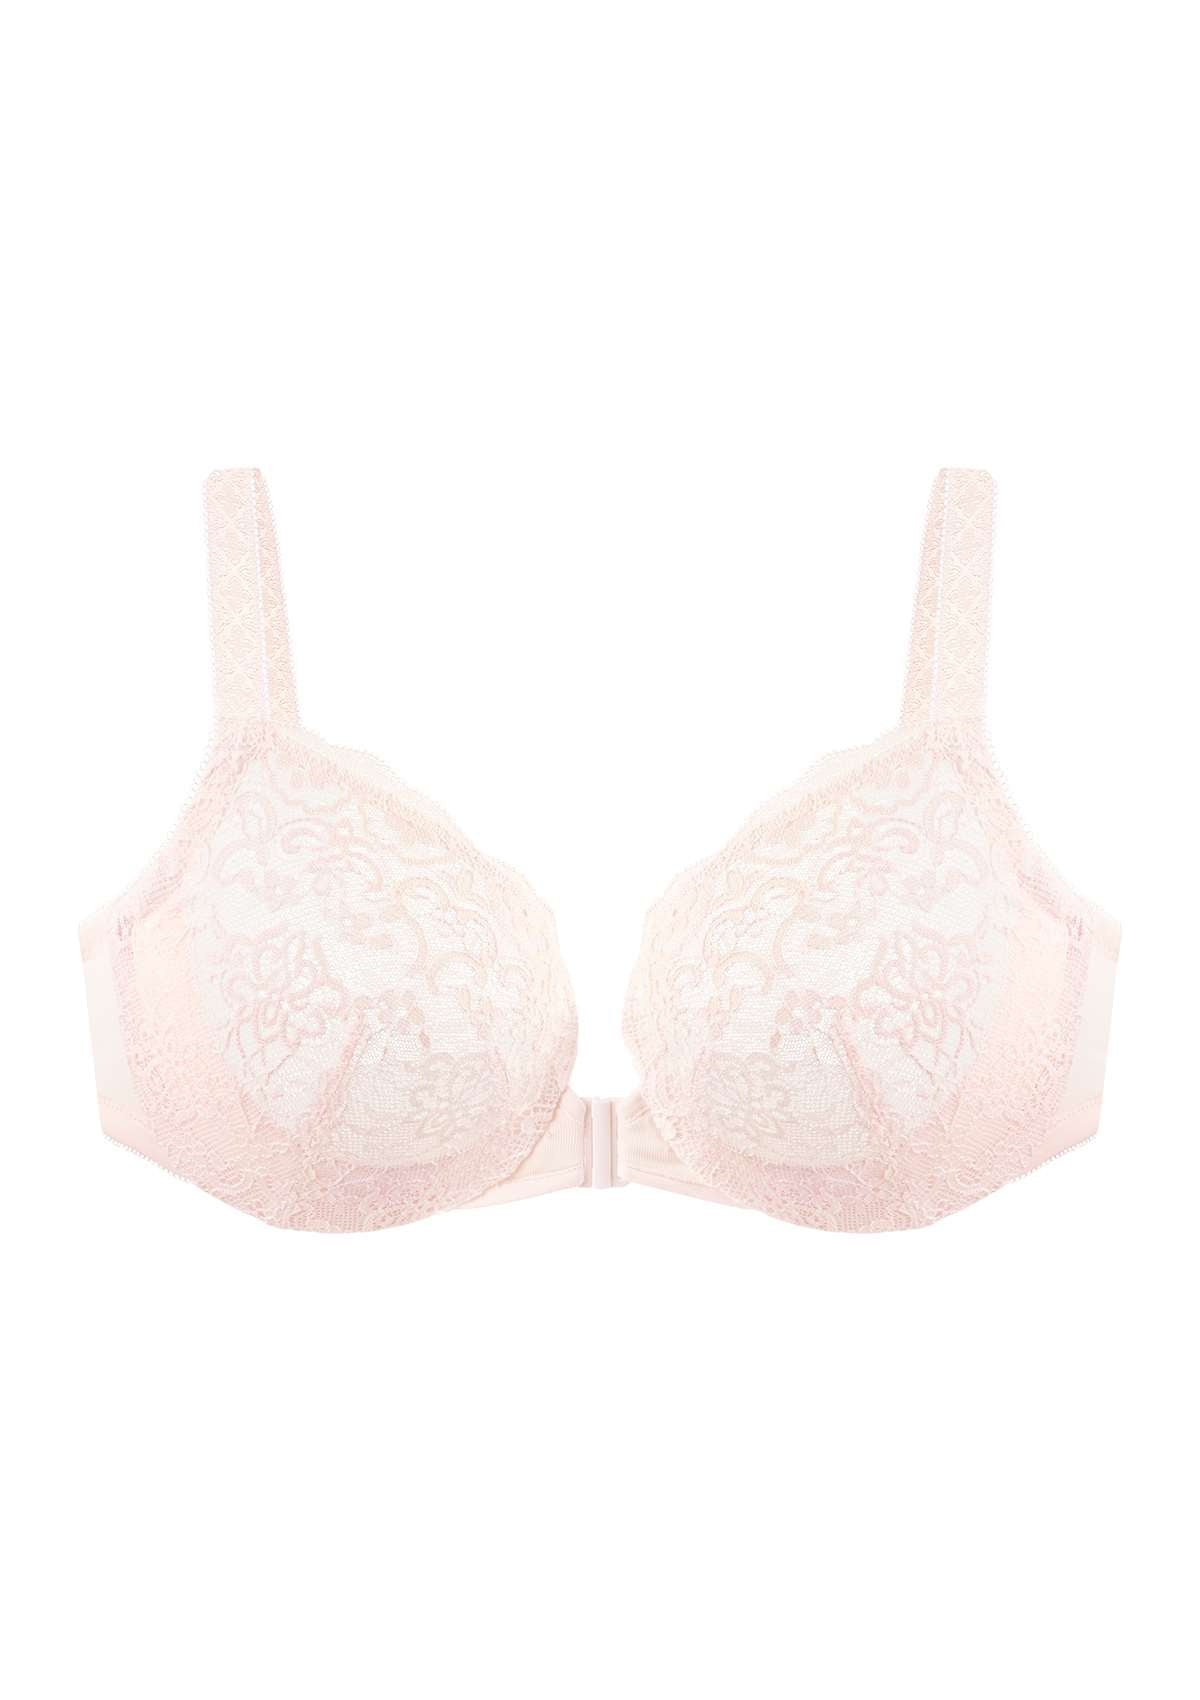 HSIA Nymphaea Easy-to-wear Front-Close Lace Unlined Underwire Bra - Dusty Peach / 42 / DD/E